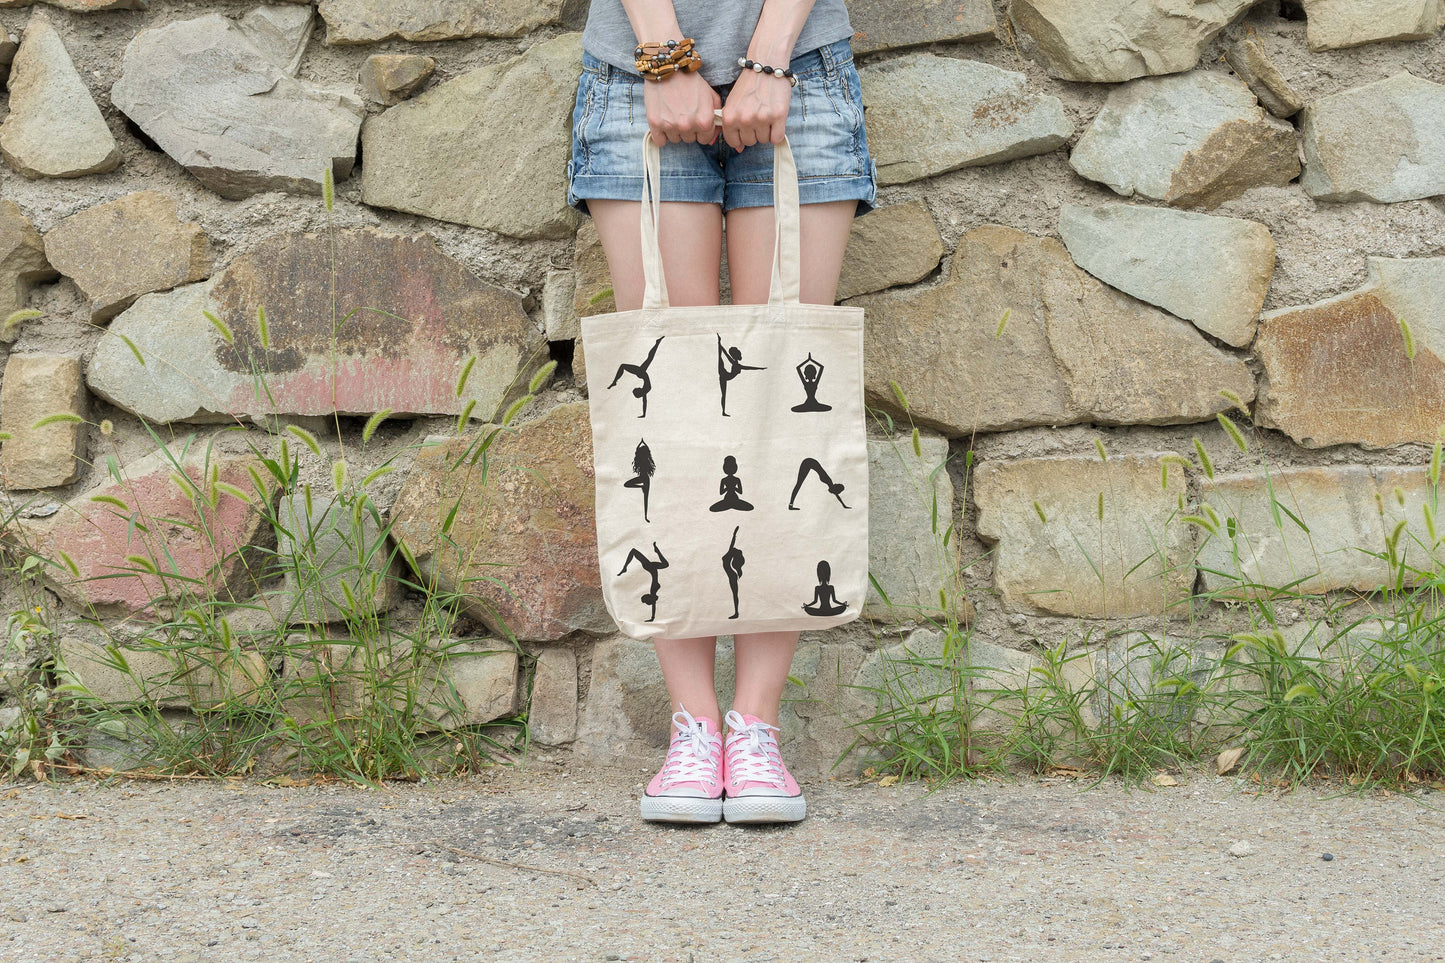 Yoga Pose Silhouettes Tote 100% Cotton Grocery Tote, Book Tote, Office Tote. Premium Cotton Canvas 15.5" by 19.5 " with 5" Gusset on bottom